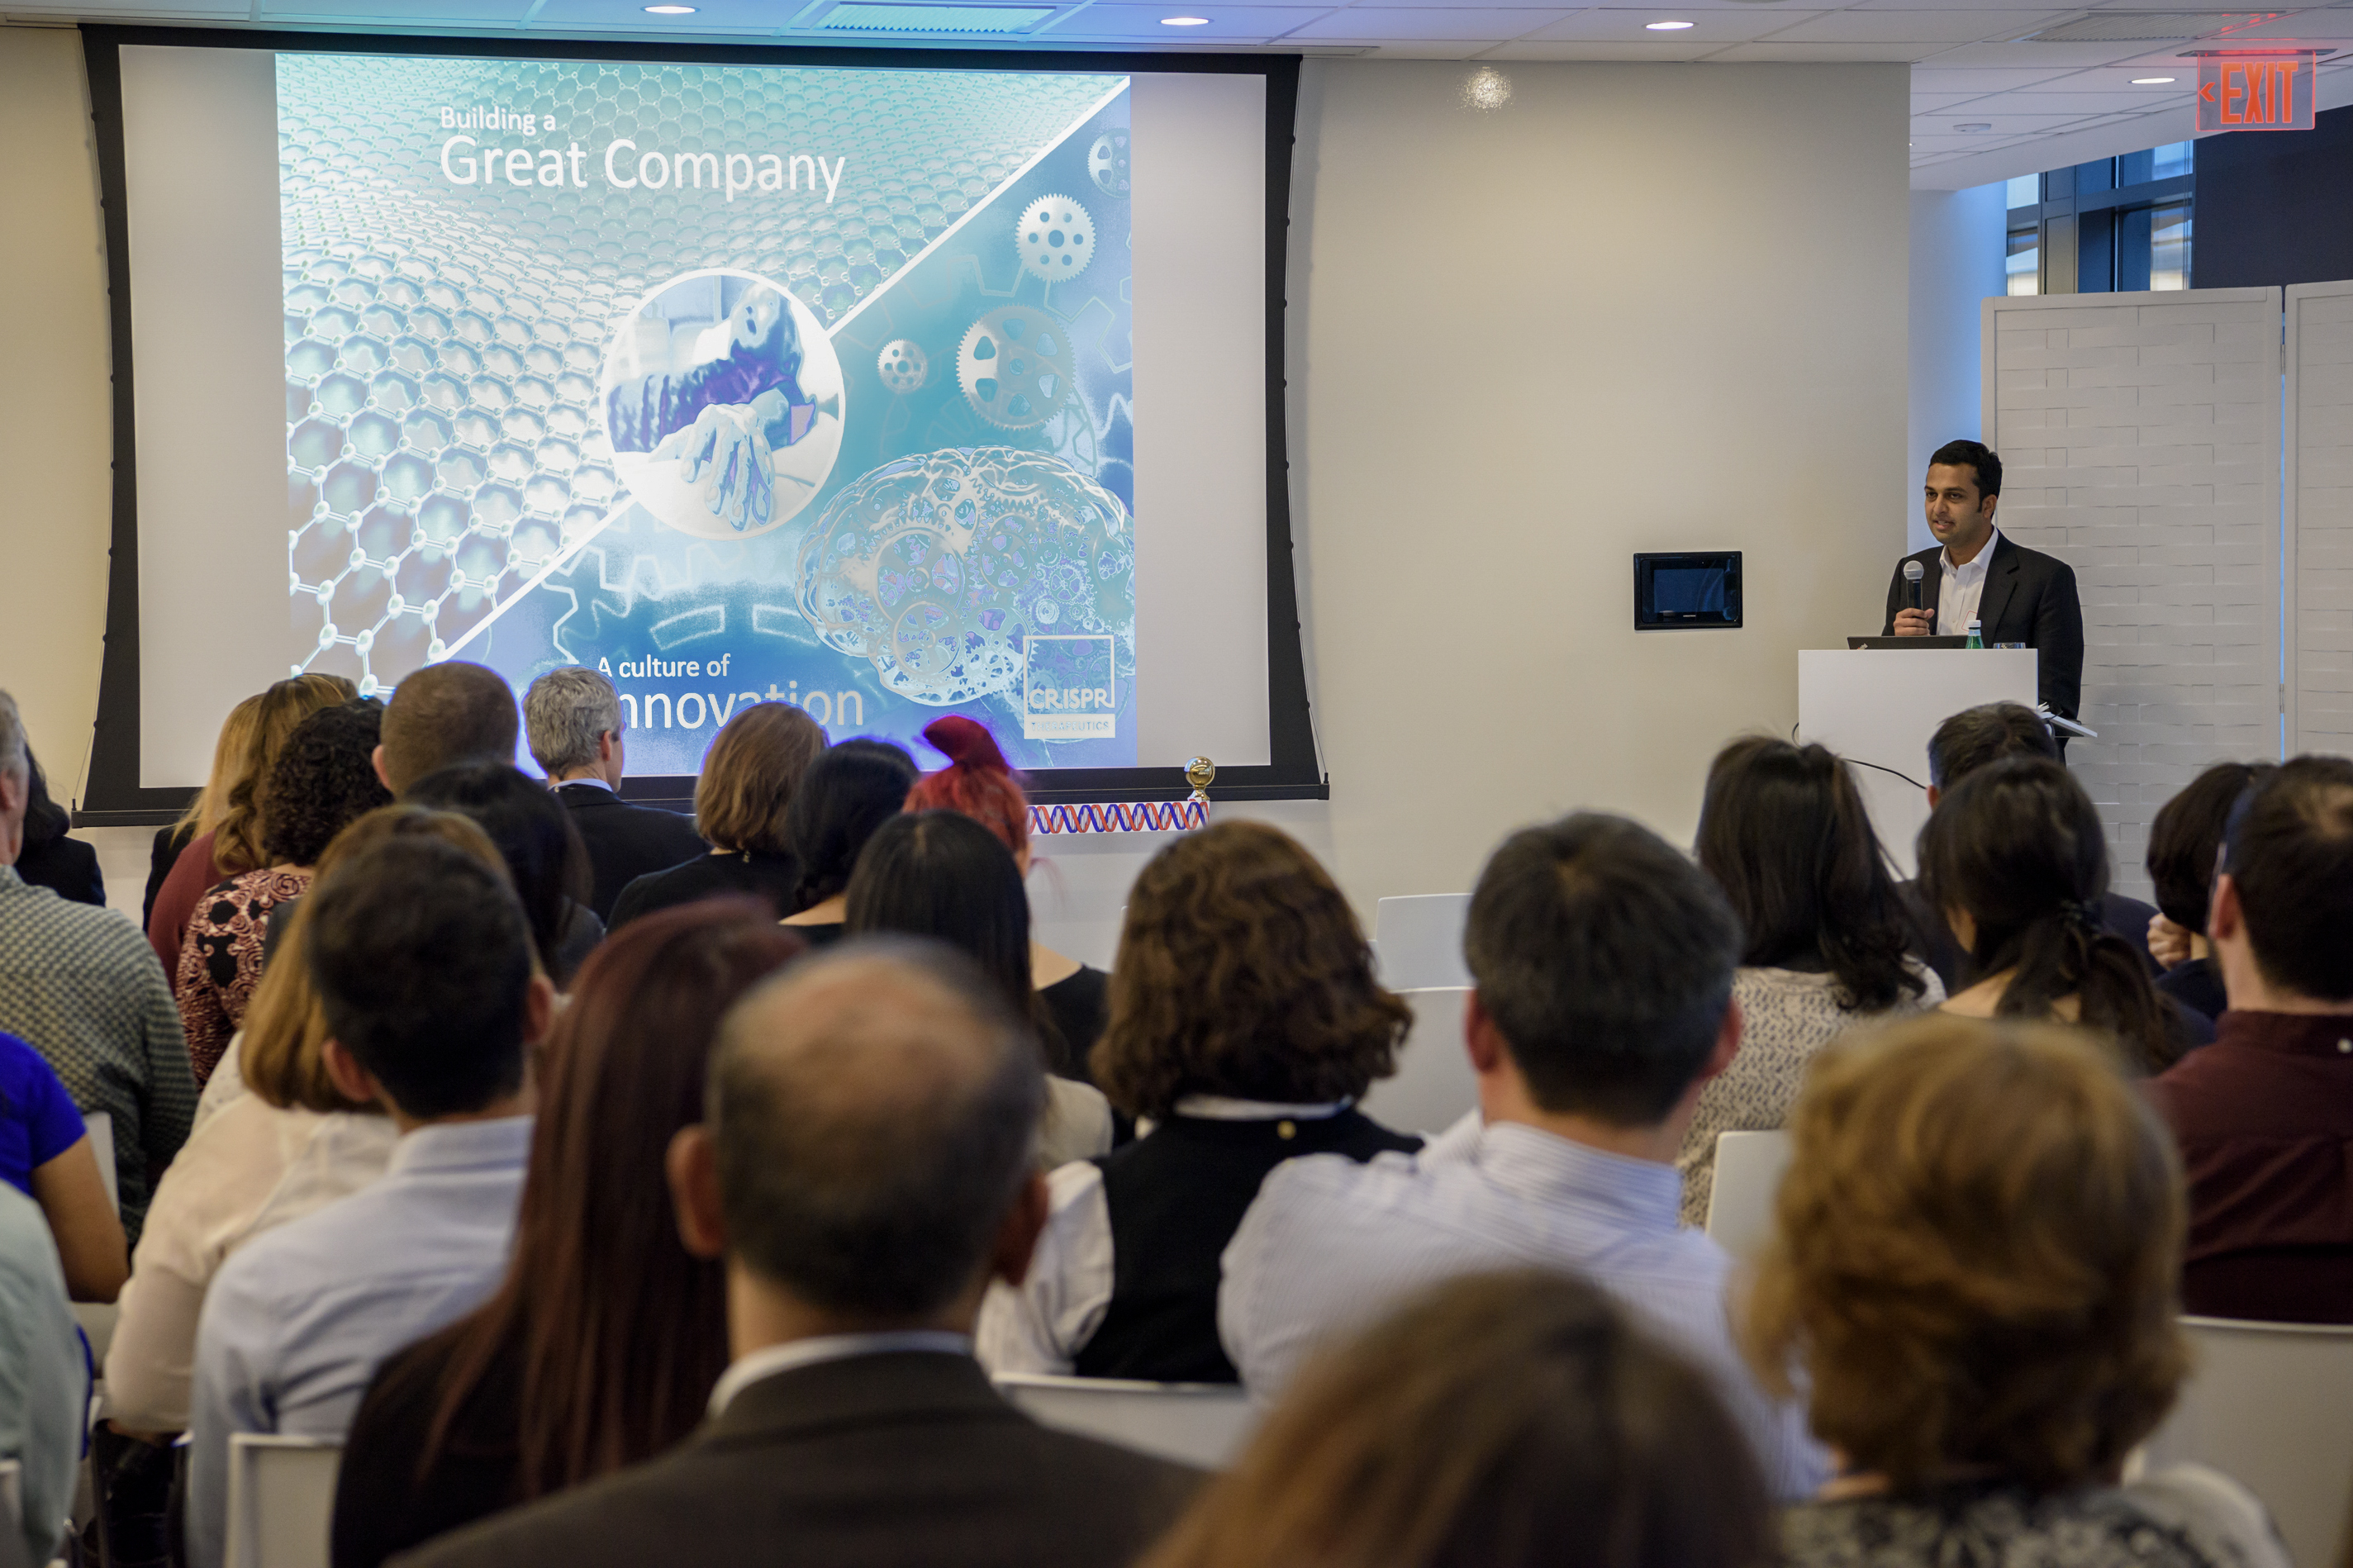 Samarth Kulkarni, CEO of CRISPR Therapeutics, speaks in front of employees at the opening of the company’s former office in Cambridge, Massachusetts in 2017.